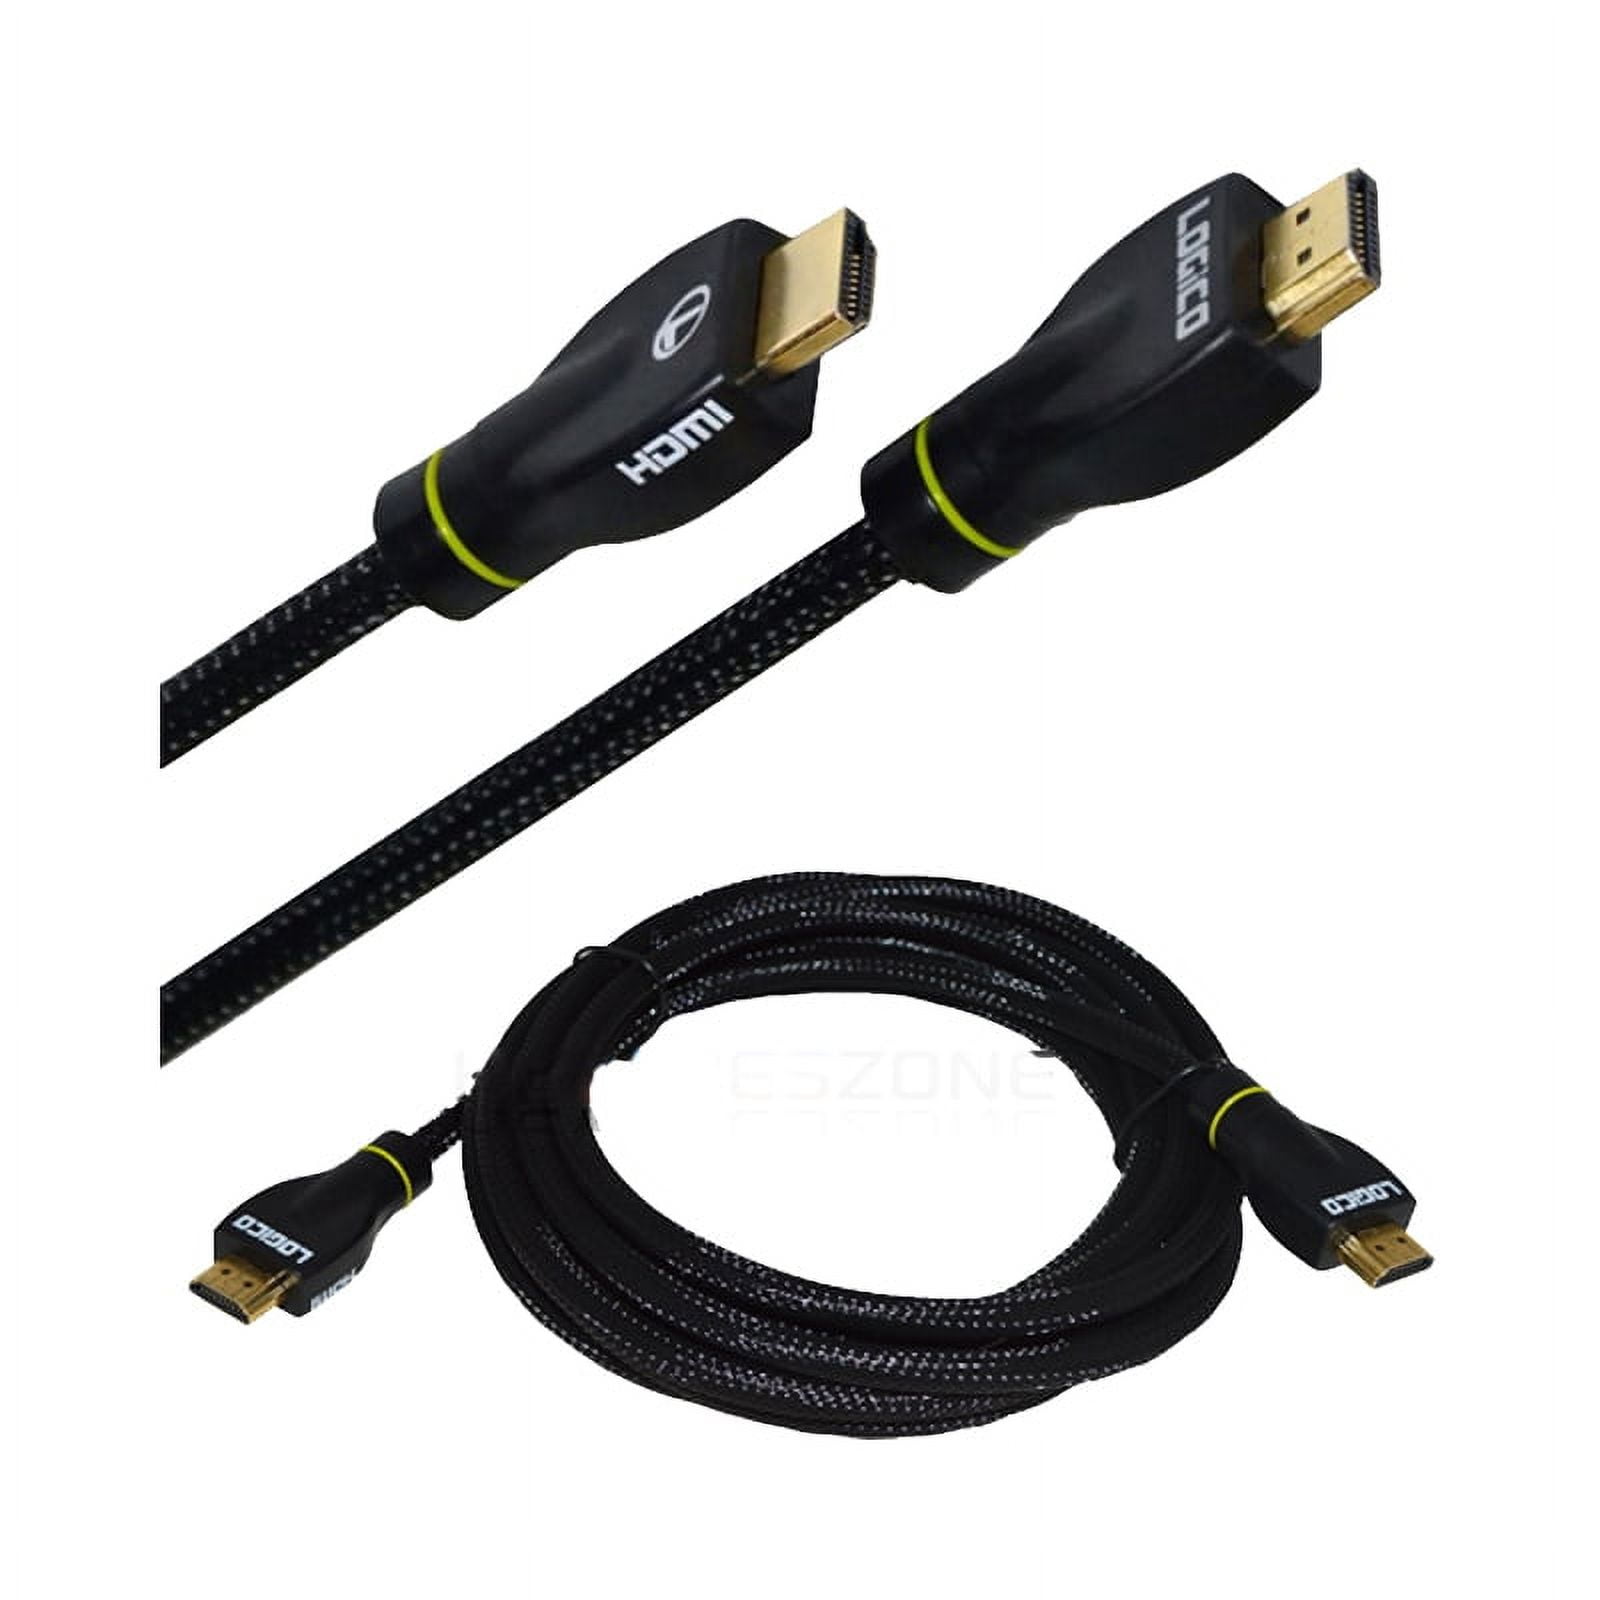 High Speed HDMI Cable, UHD 4K, Digital Video/Audio, 20-ft.